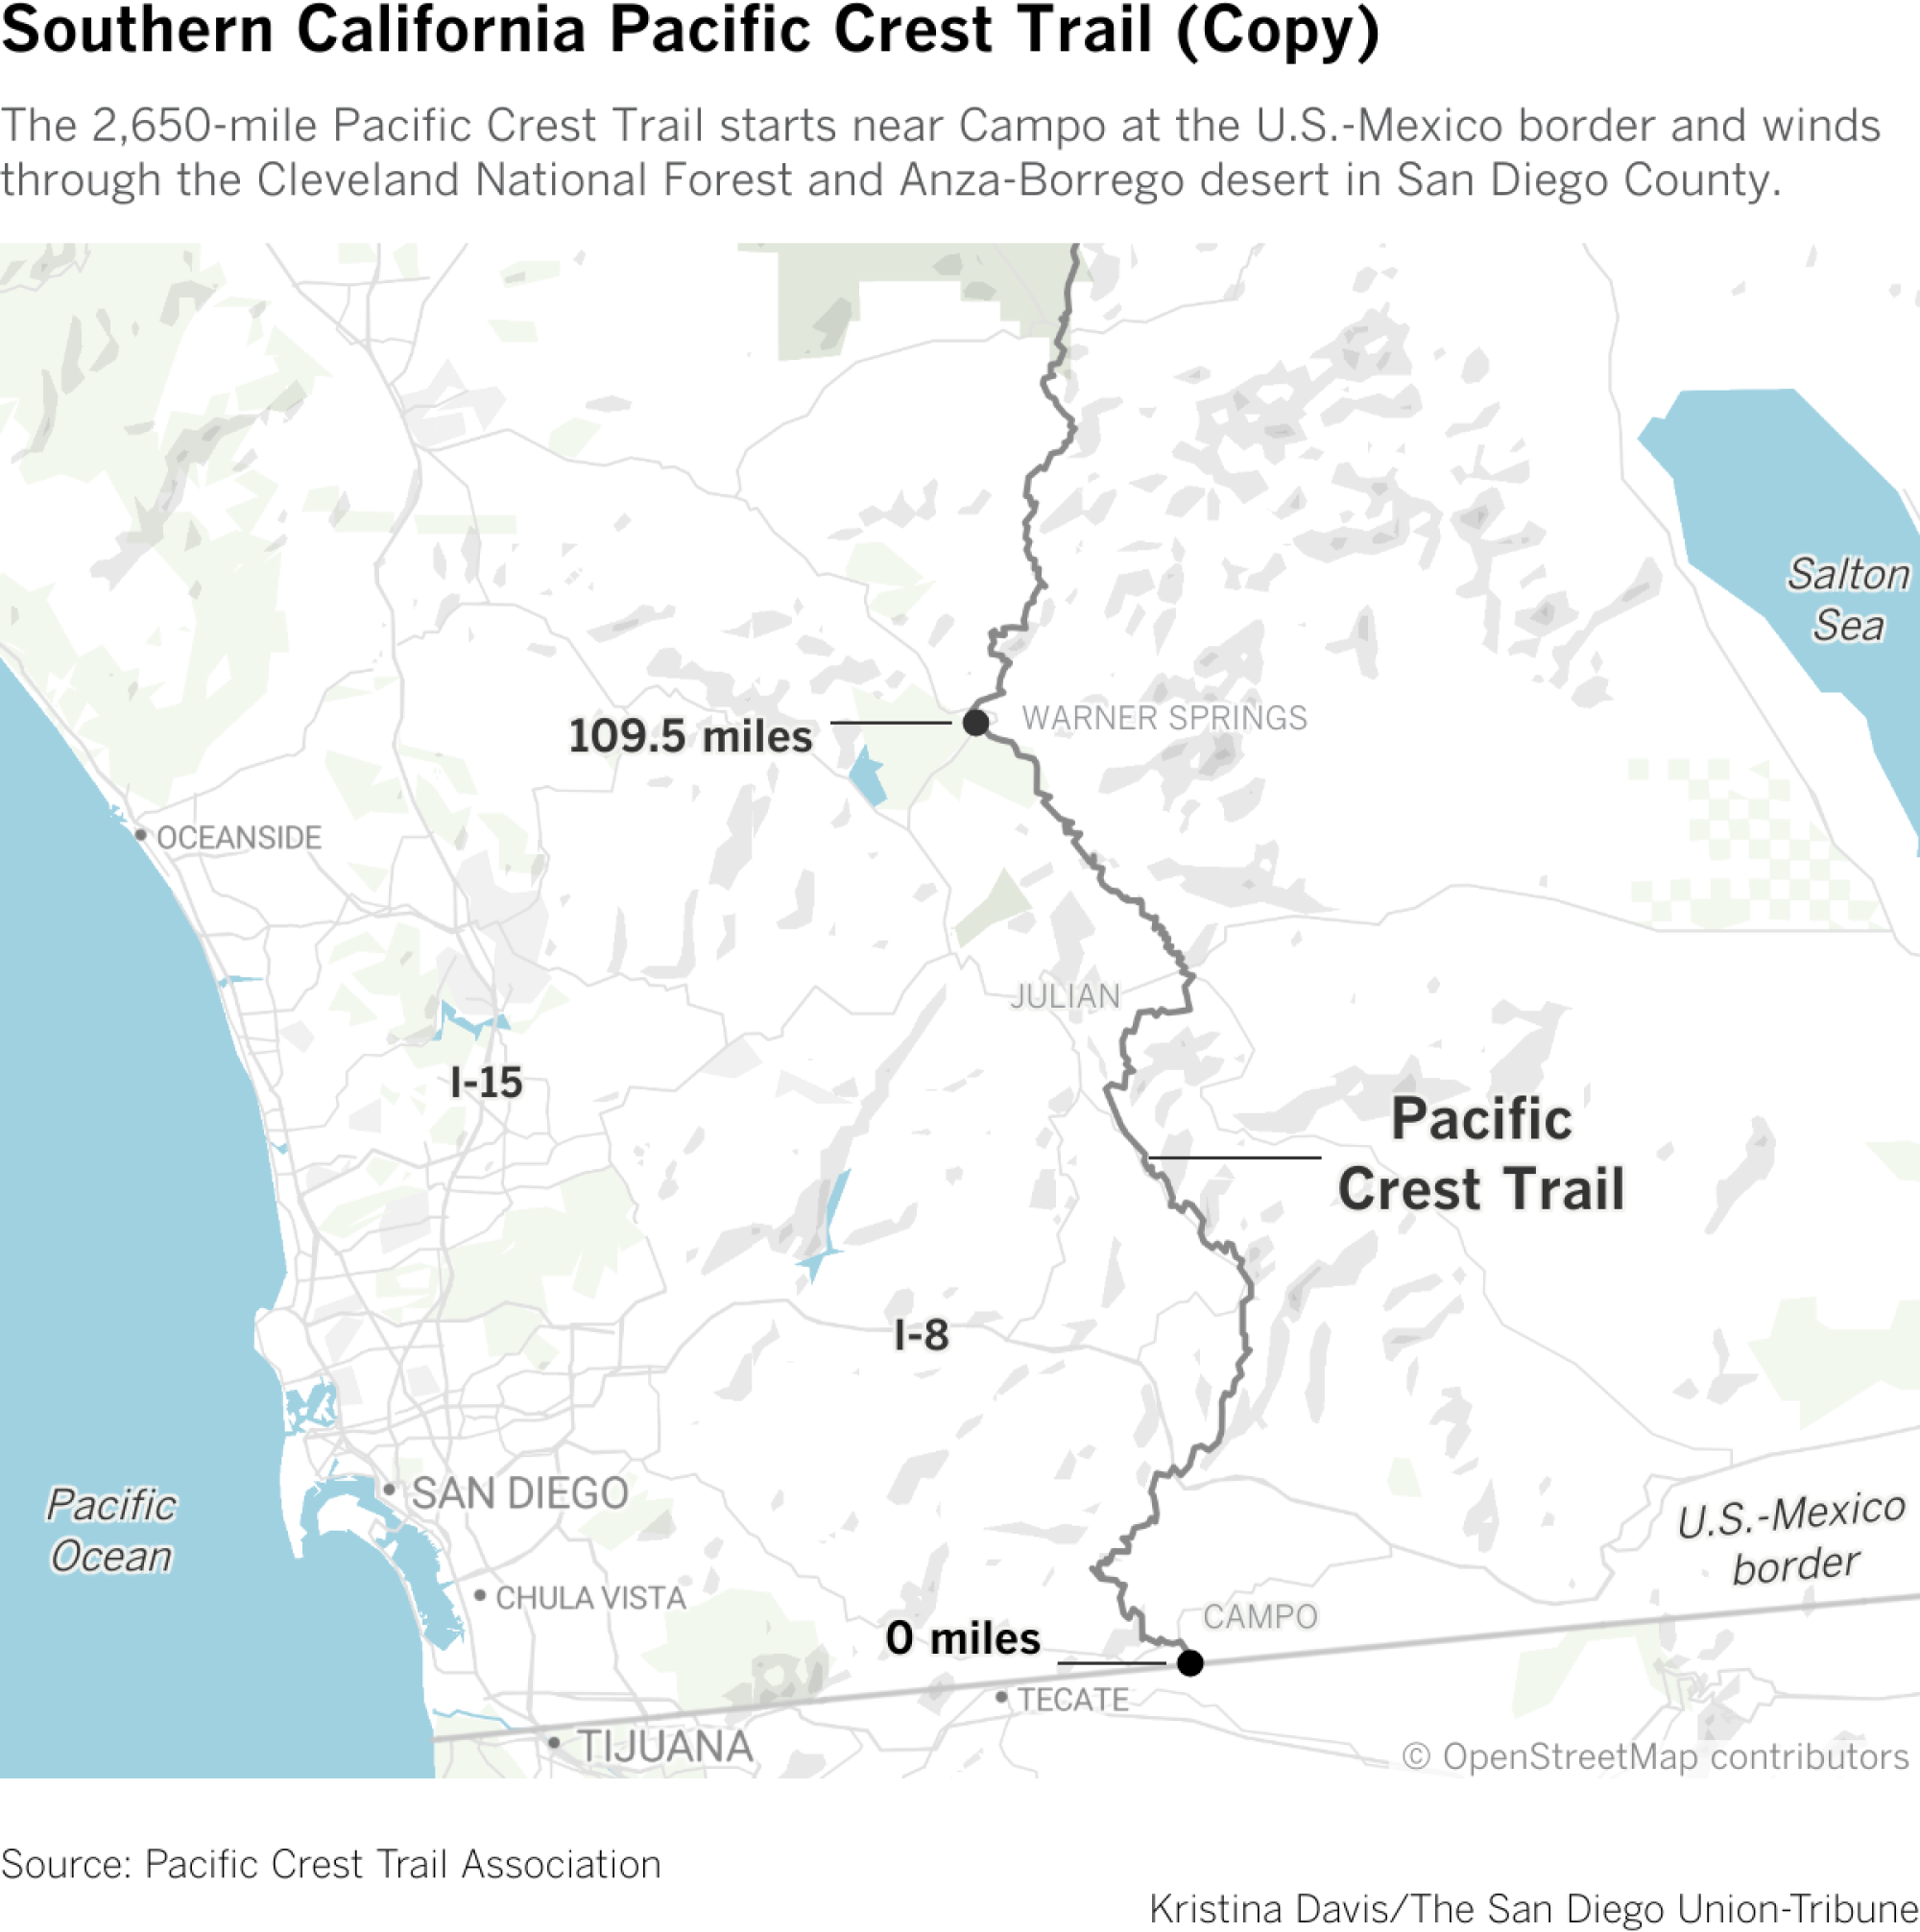 The 2,650-mile Pacific Crest Trail starts near Campo at the U.S.-Mexico border and winds through the Cleveland National Forest and Anza-Borrego desert in San Diego County.